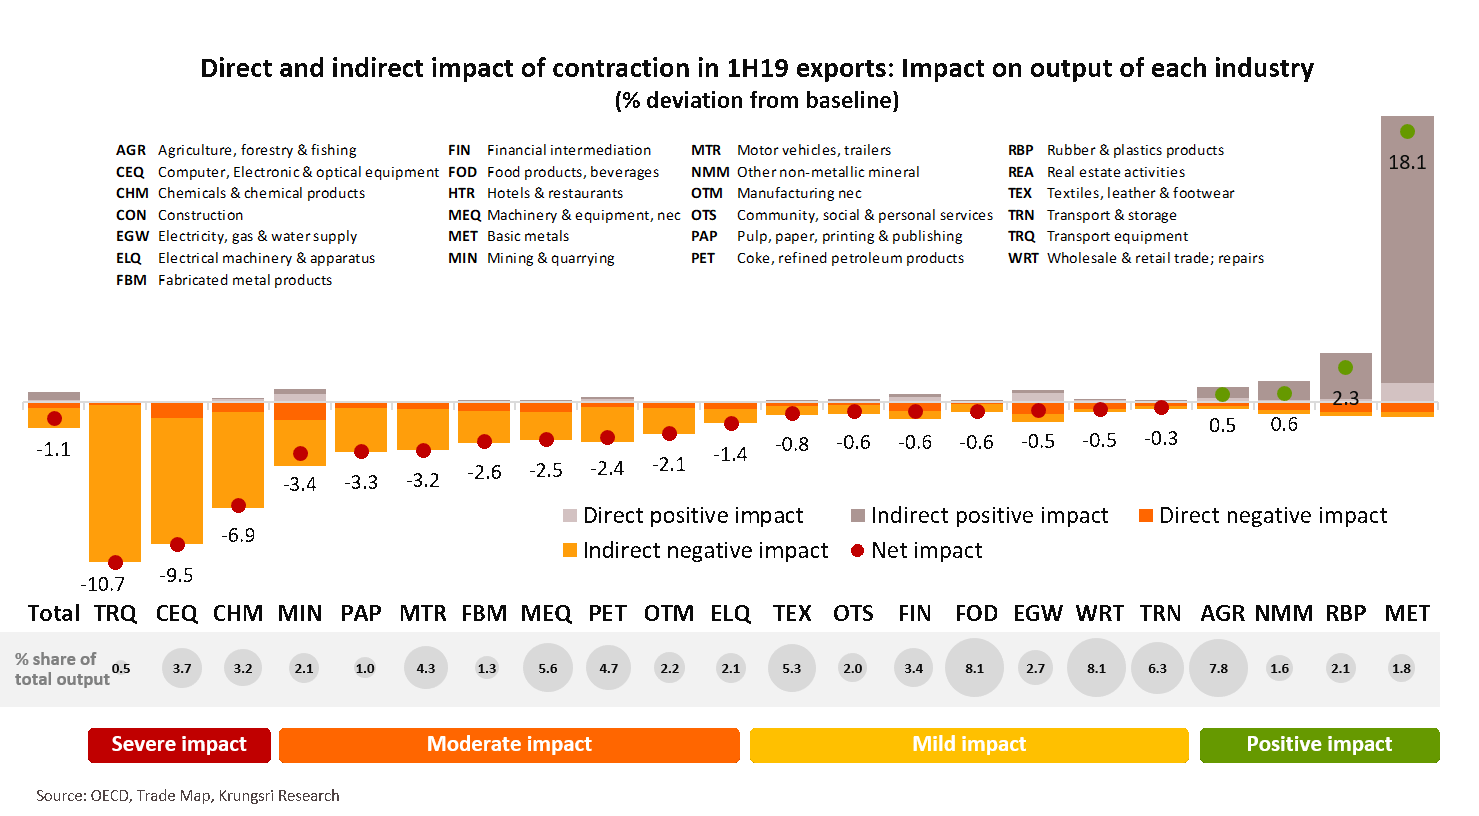 Direct and indirect impact of contraction in 1H19 exports